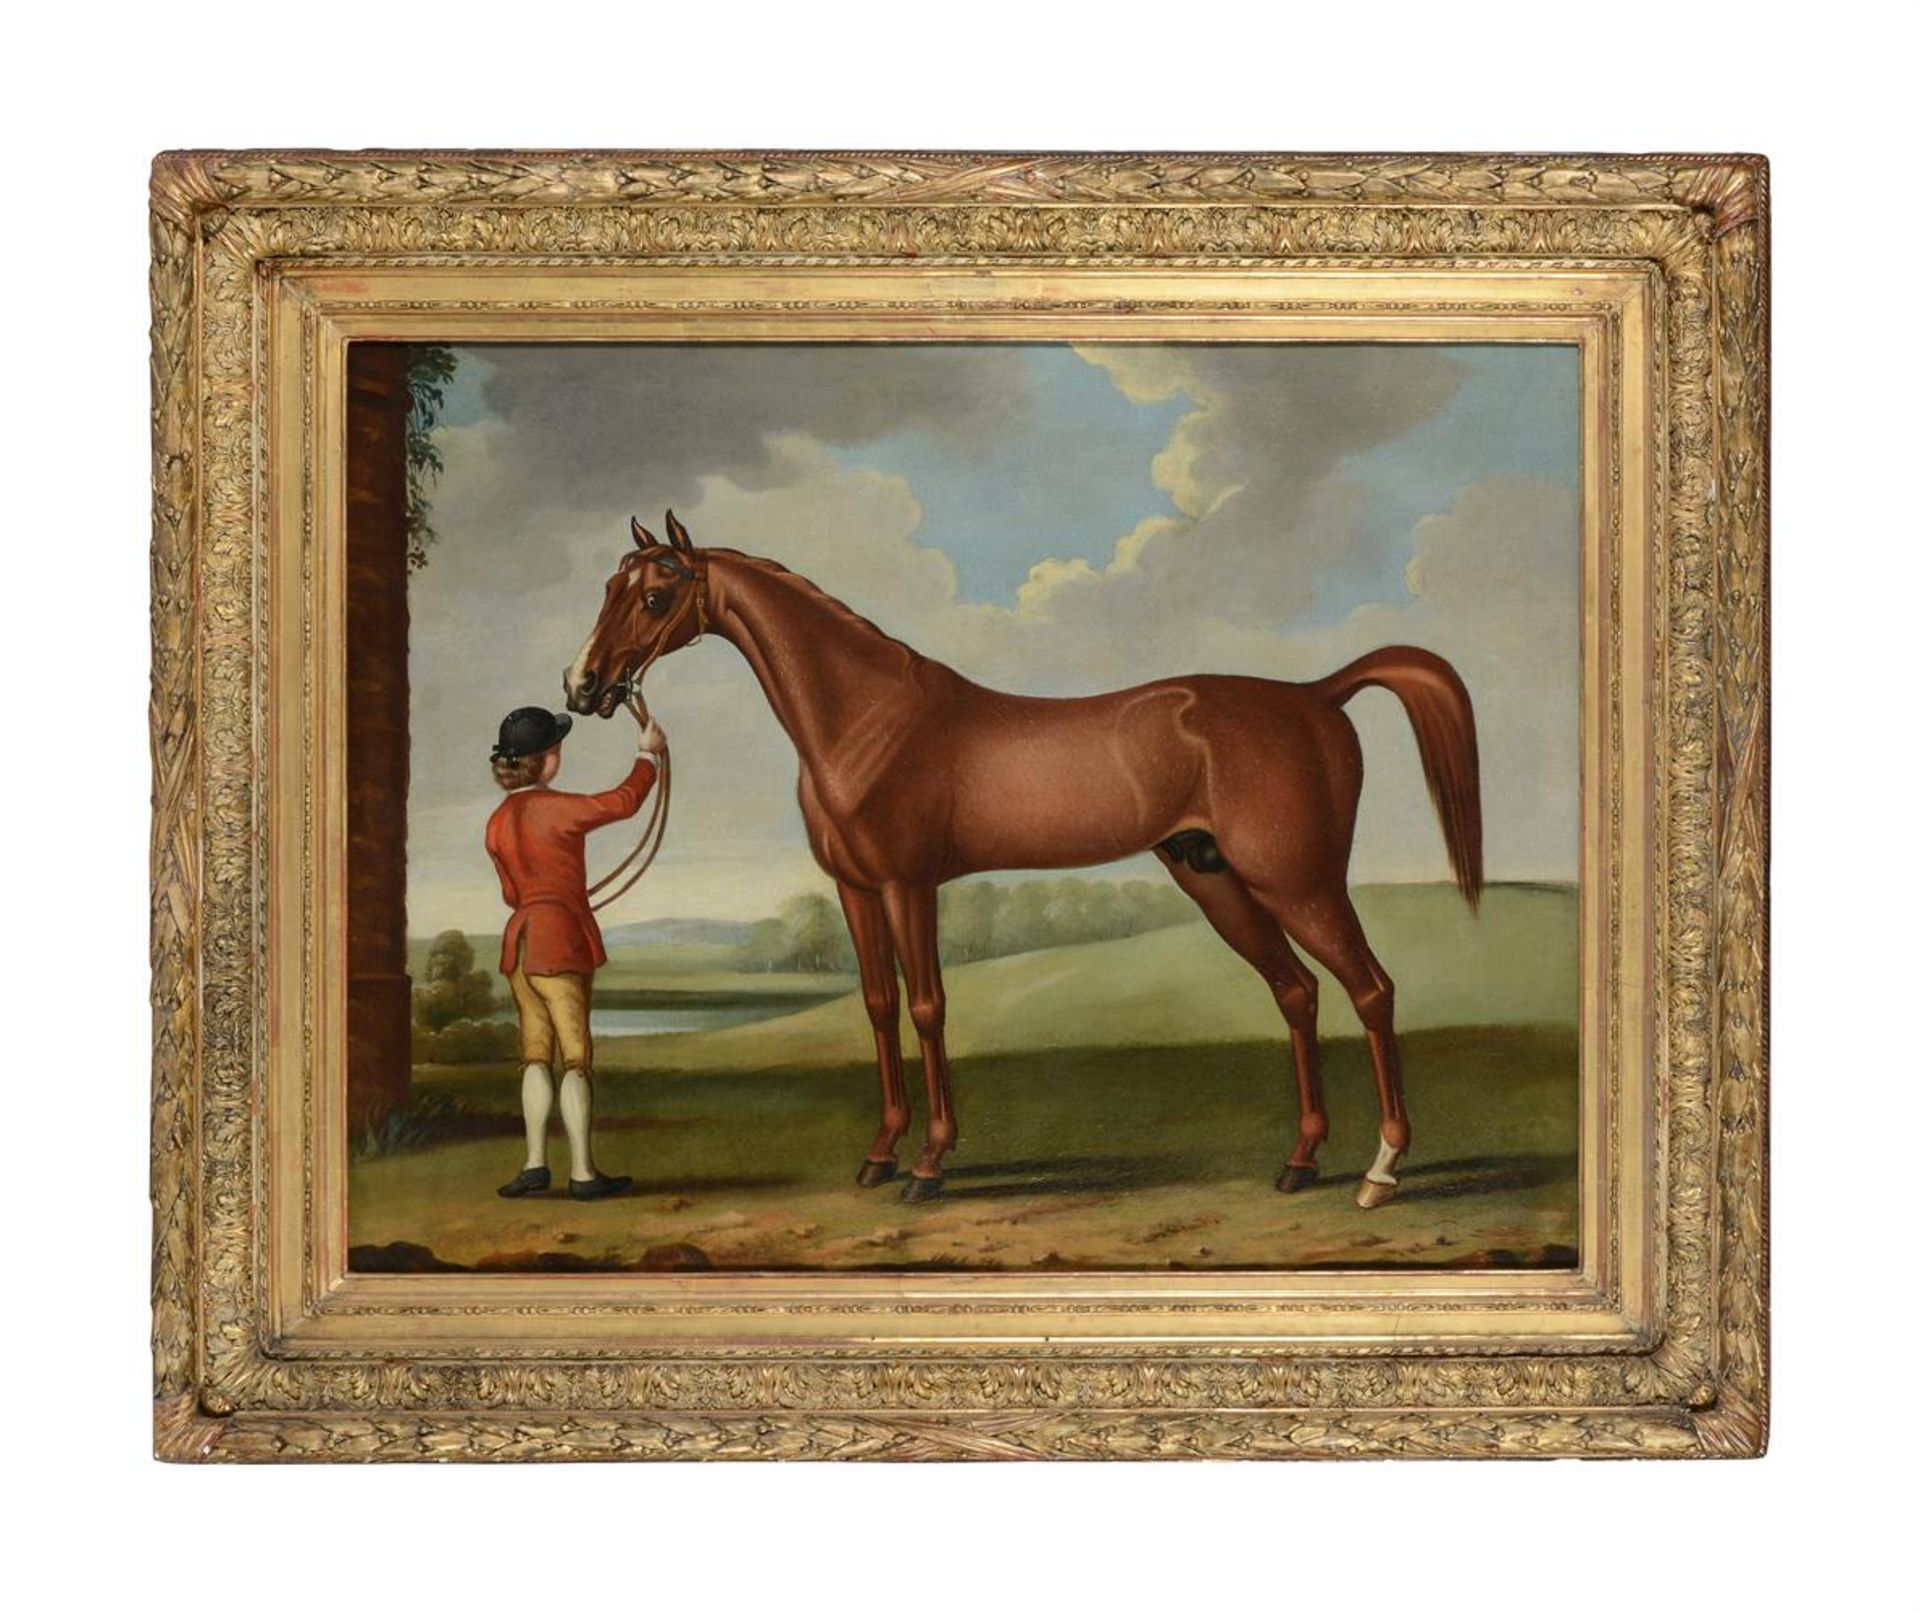 FOLLOWER OF JOHN WOOTTON, A HORSE HELD BY A GROOM - Image 2 of 3